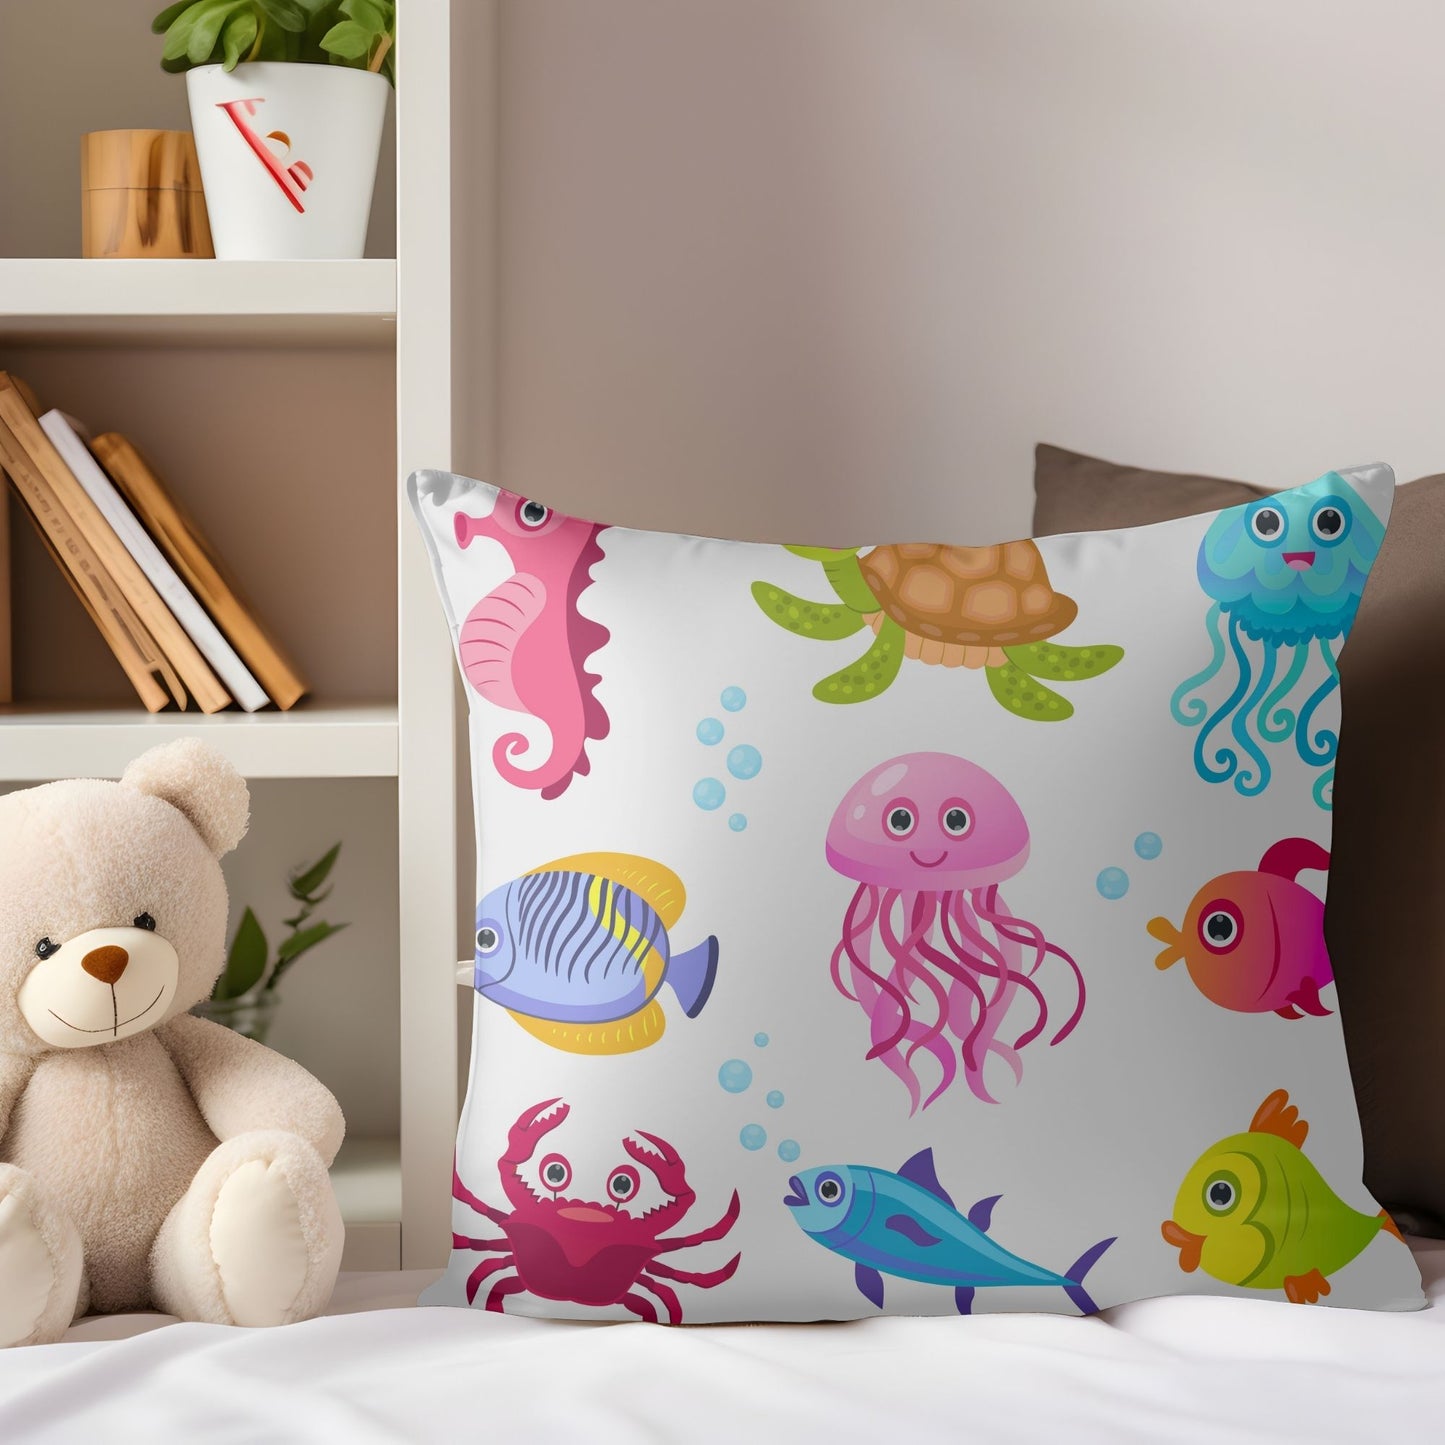 Colorful sea animals pattern kids pillow for cozy comfort.